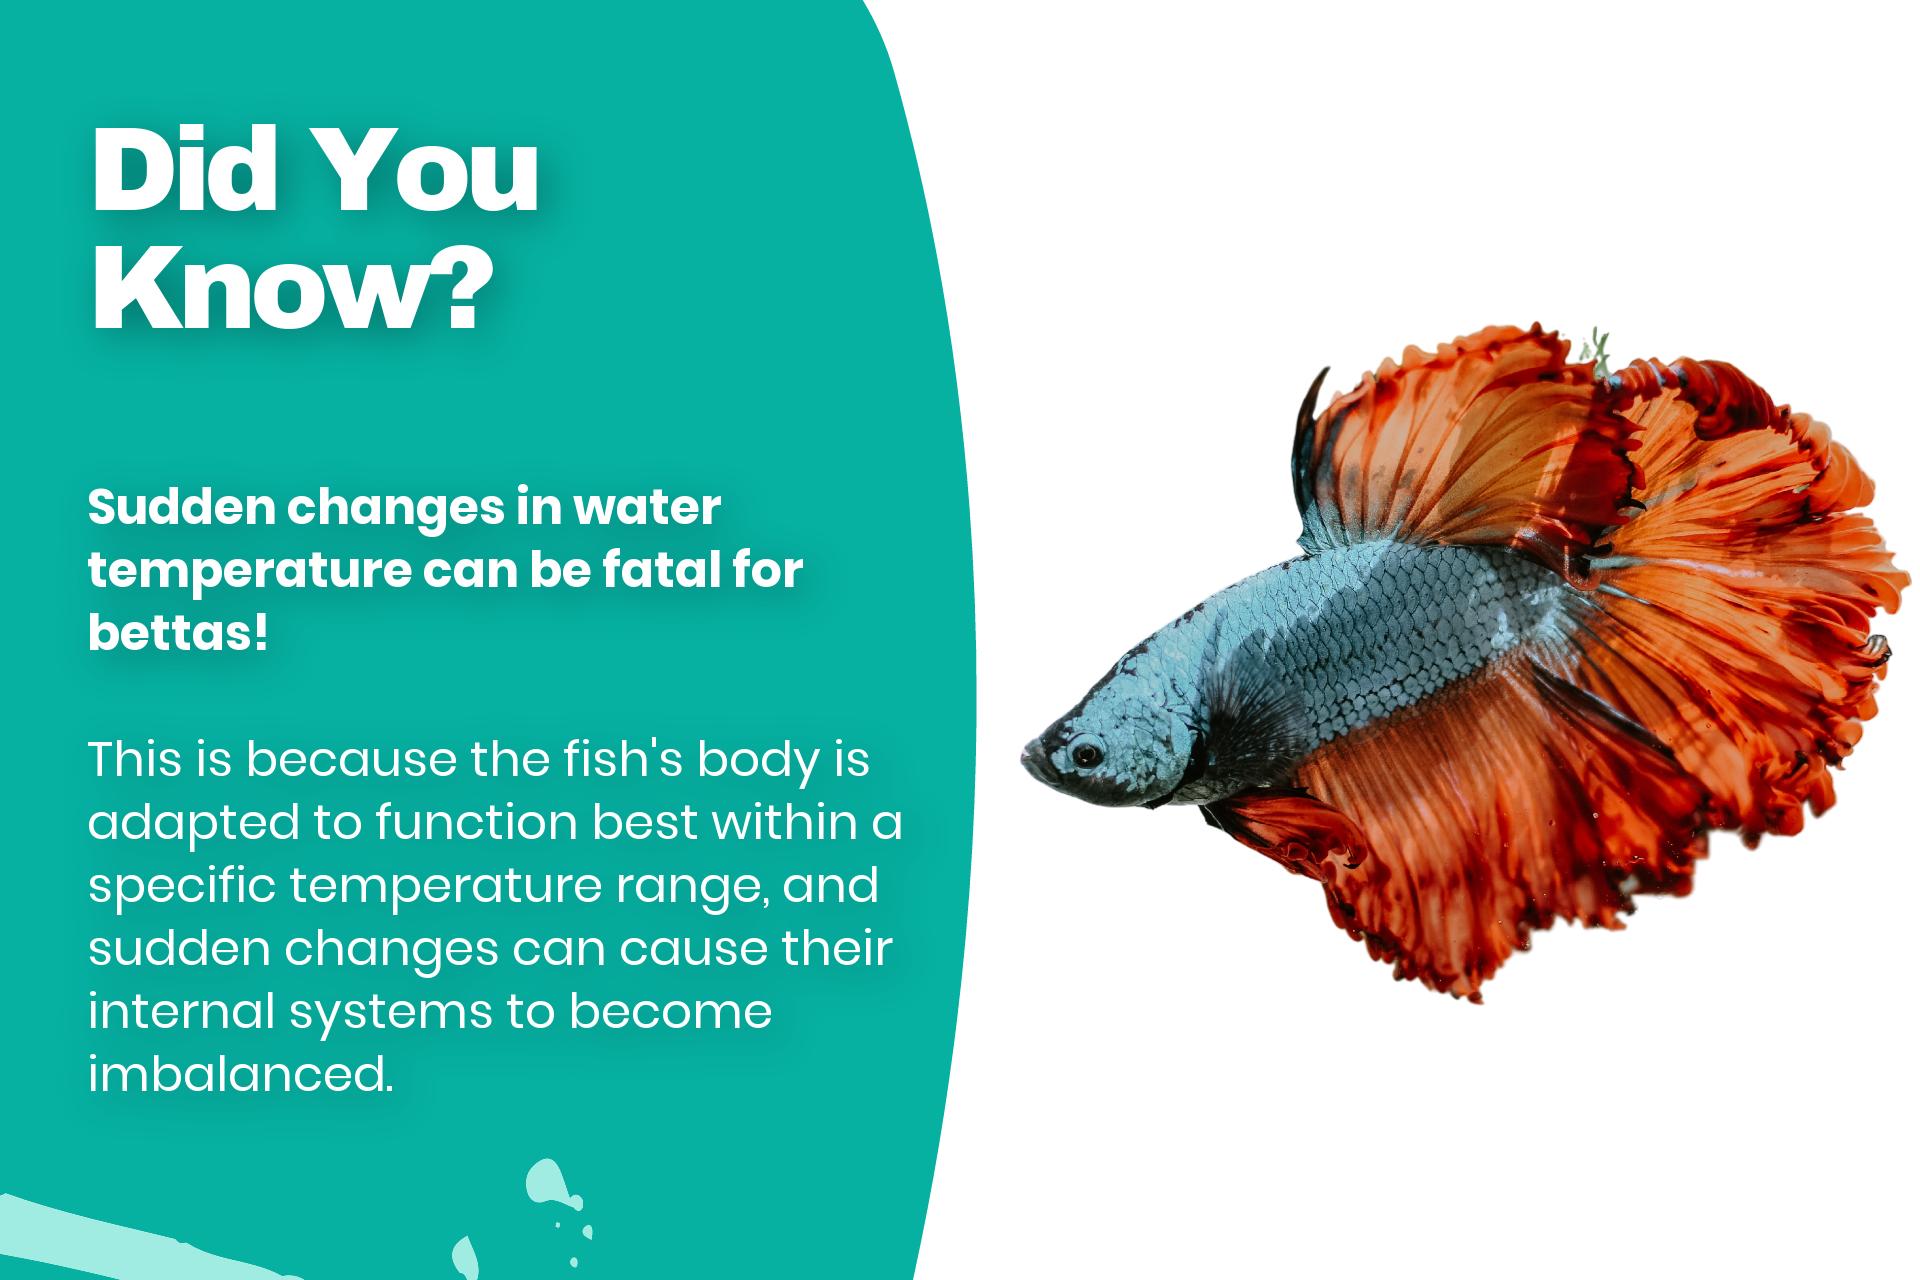 Sudden changes in water temperature can be fatal for bettas